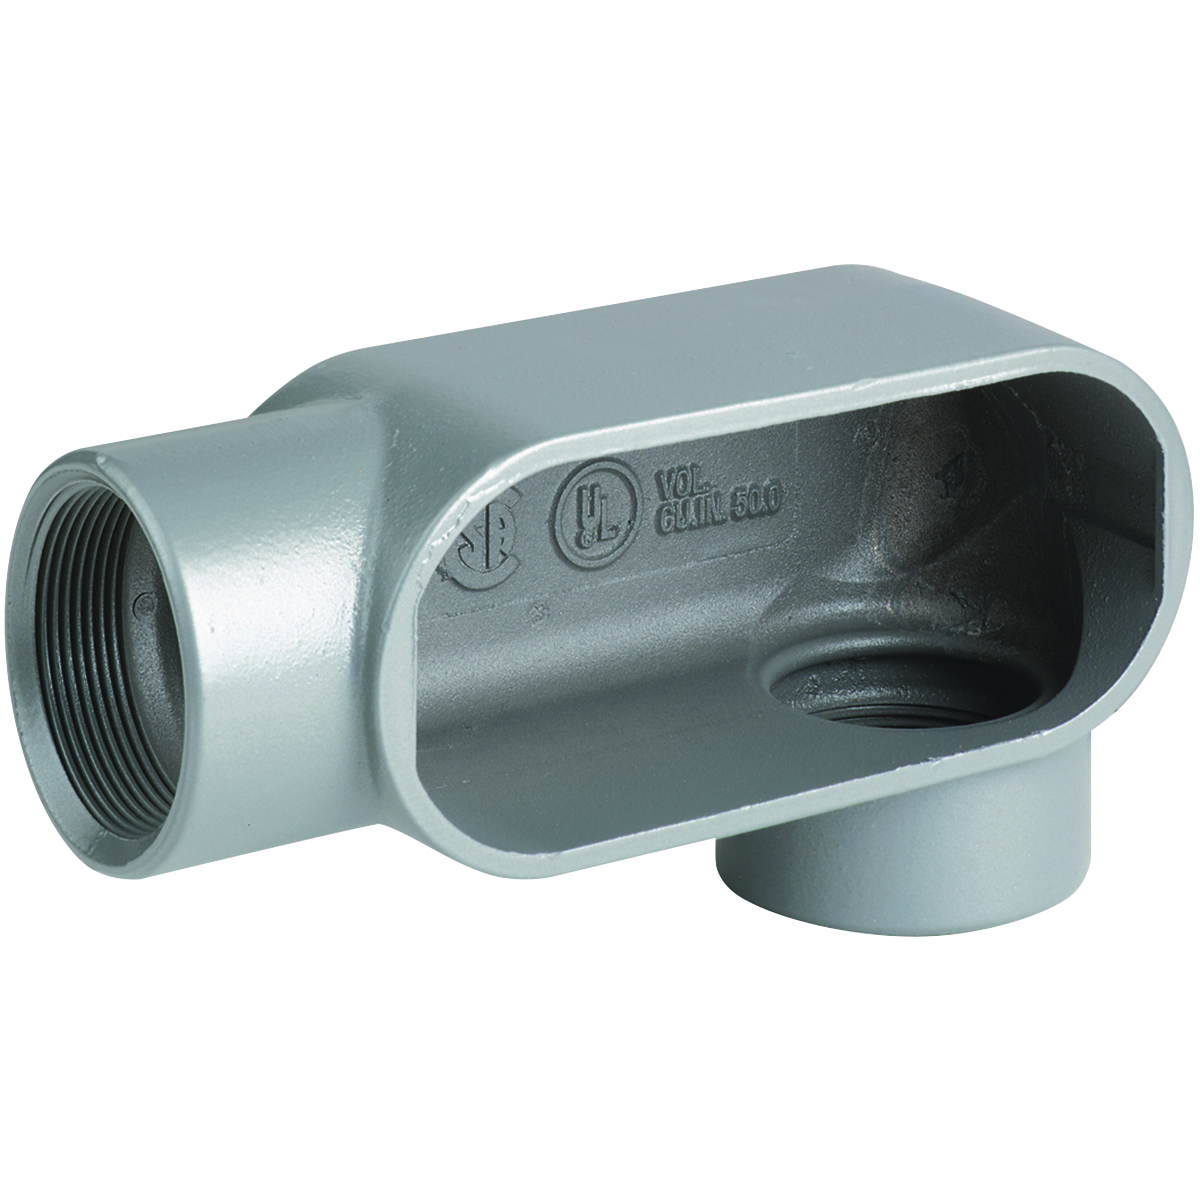 DURALOY 7 SERIES - IRON CONDUIT BODY - LL TYPE - HUB SIZE 3/4 INCH -VOLUME 7.0 CUBIC INCHES